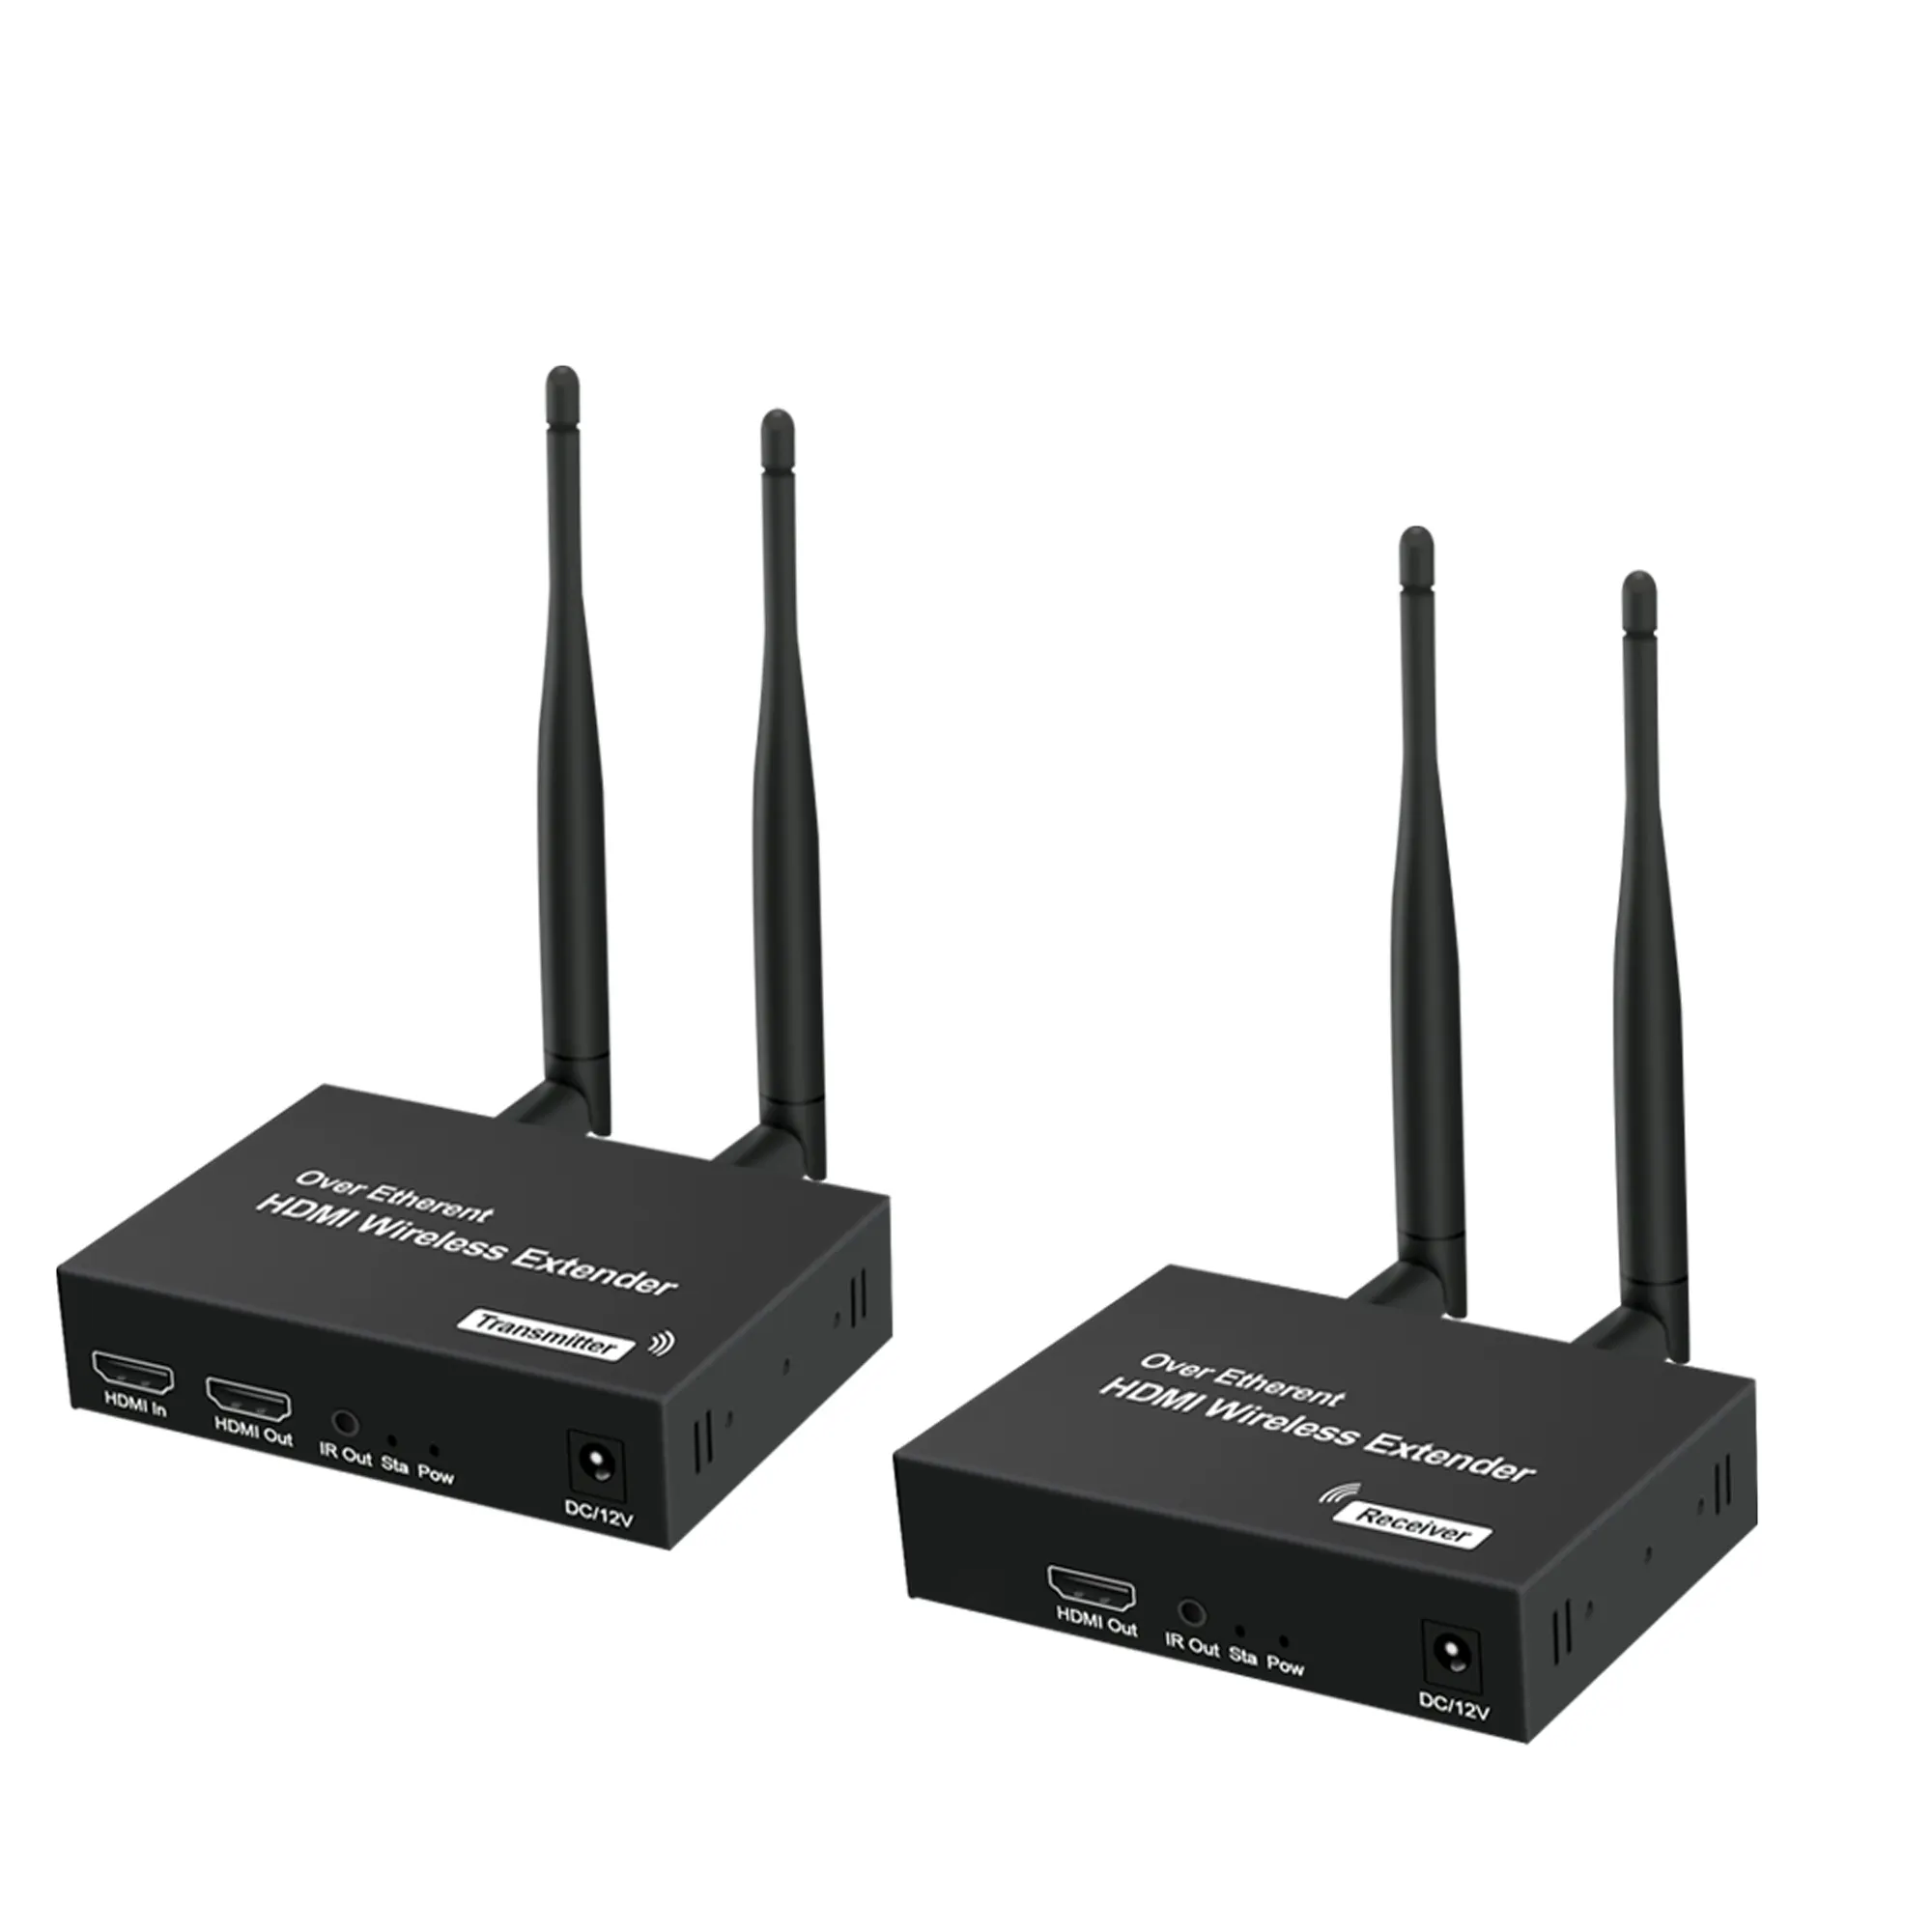 Hot Selling Wireless HDMI上Wireless Extender 1080P Full HD 200とIR Remote Transmitter And Receiver Kit